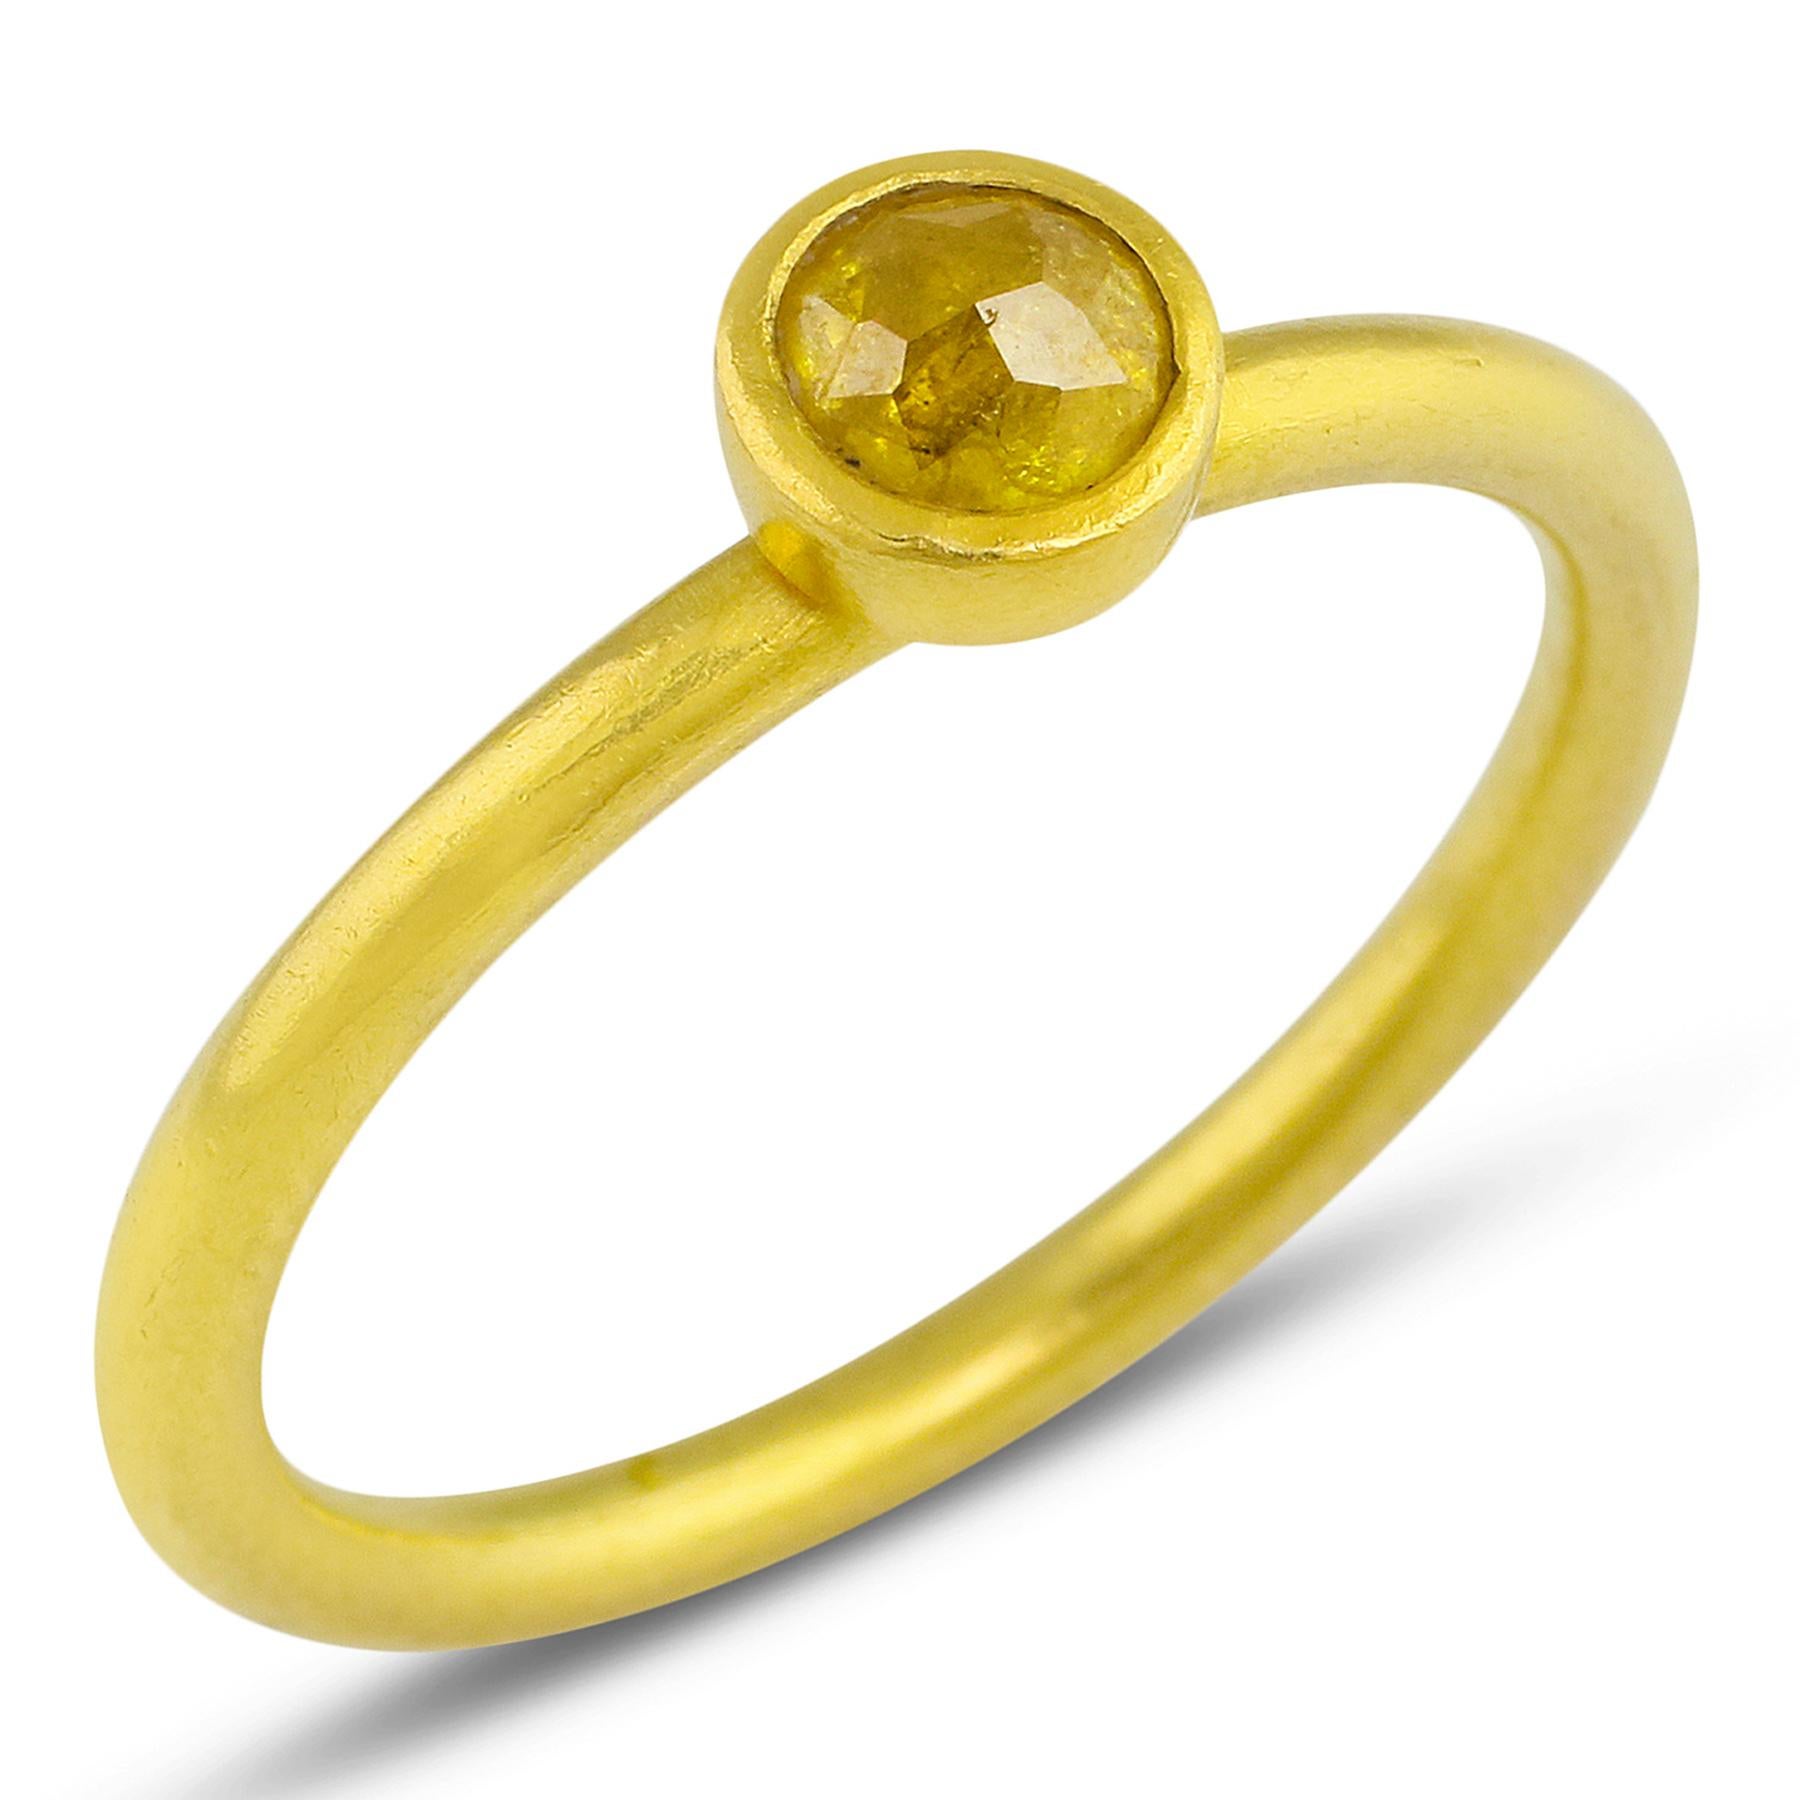 PHILIPPE-SPENCER -  .40 Ct. Natural Yellow Rose Cut Diamond wrapped in 22K Gold Bezel with Solid Round 20K Gold Ring. Brushed Matte Finish. Suitable for Nesting. Size 7, and is in-stock and ready to ship. Our apologies in advance, this One-Of-A-Kind